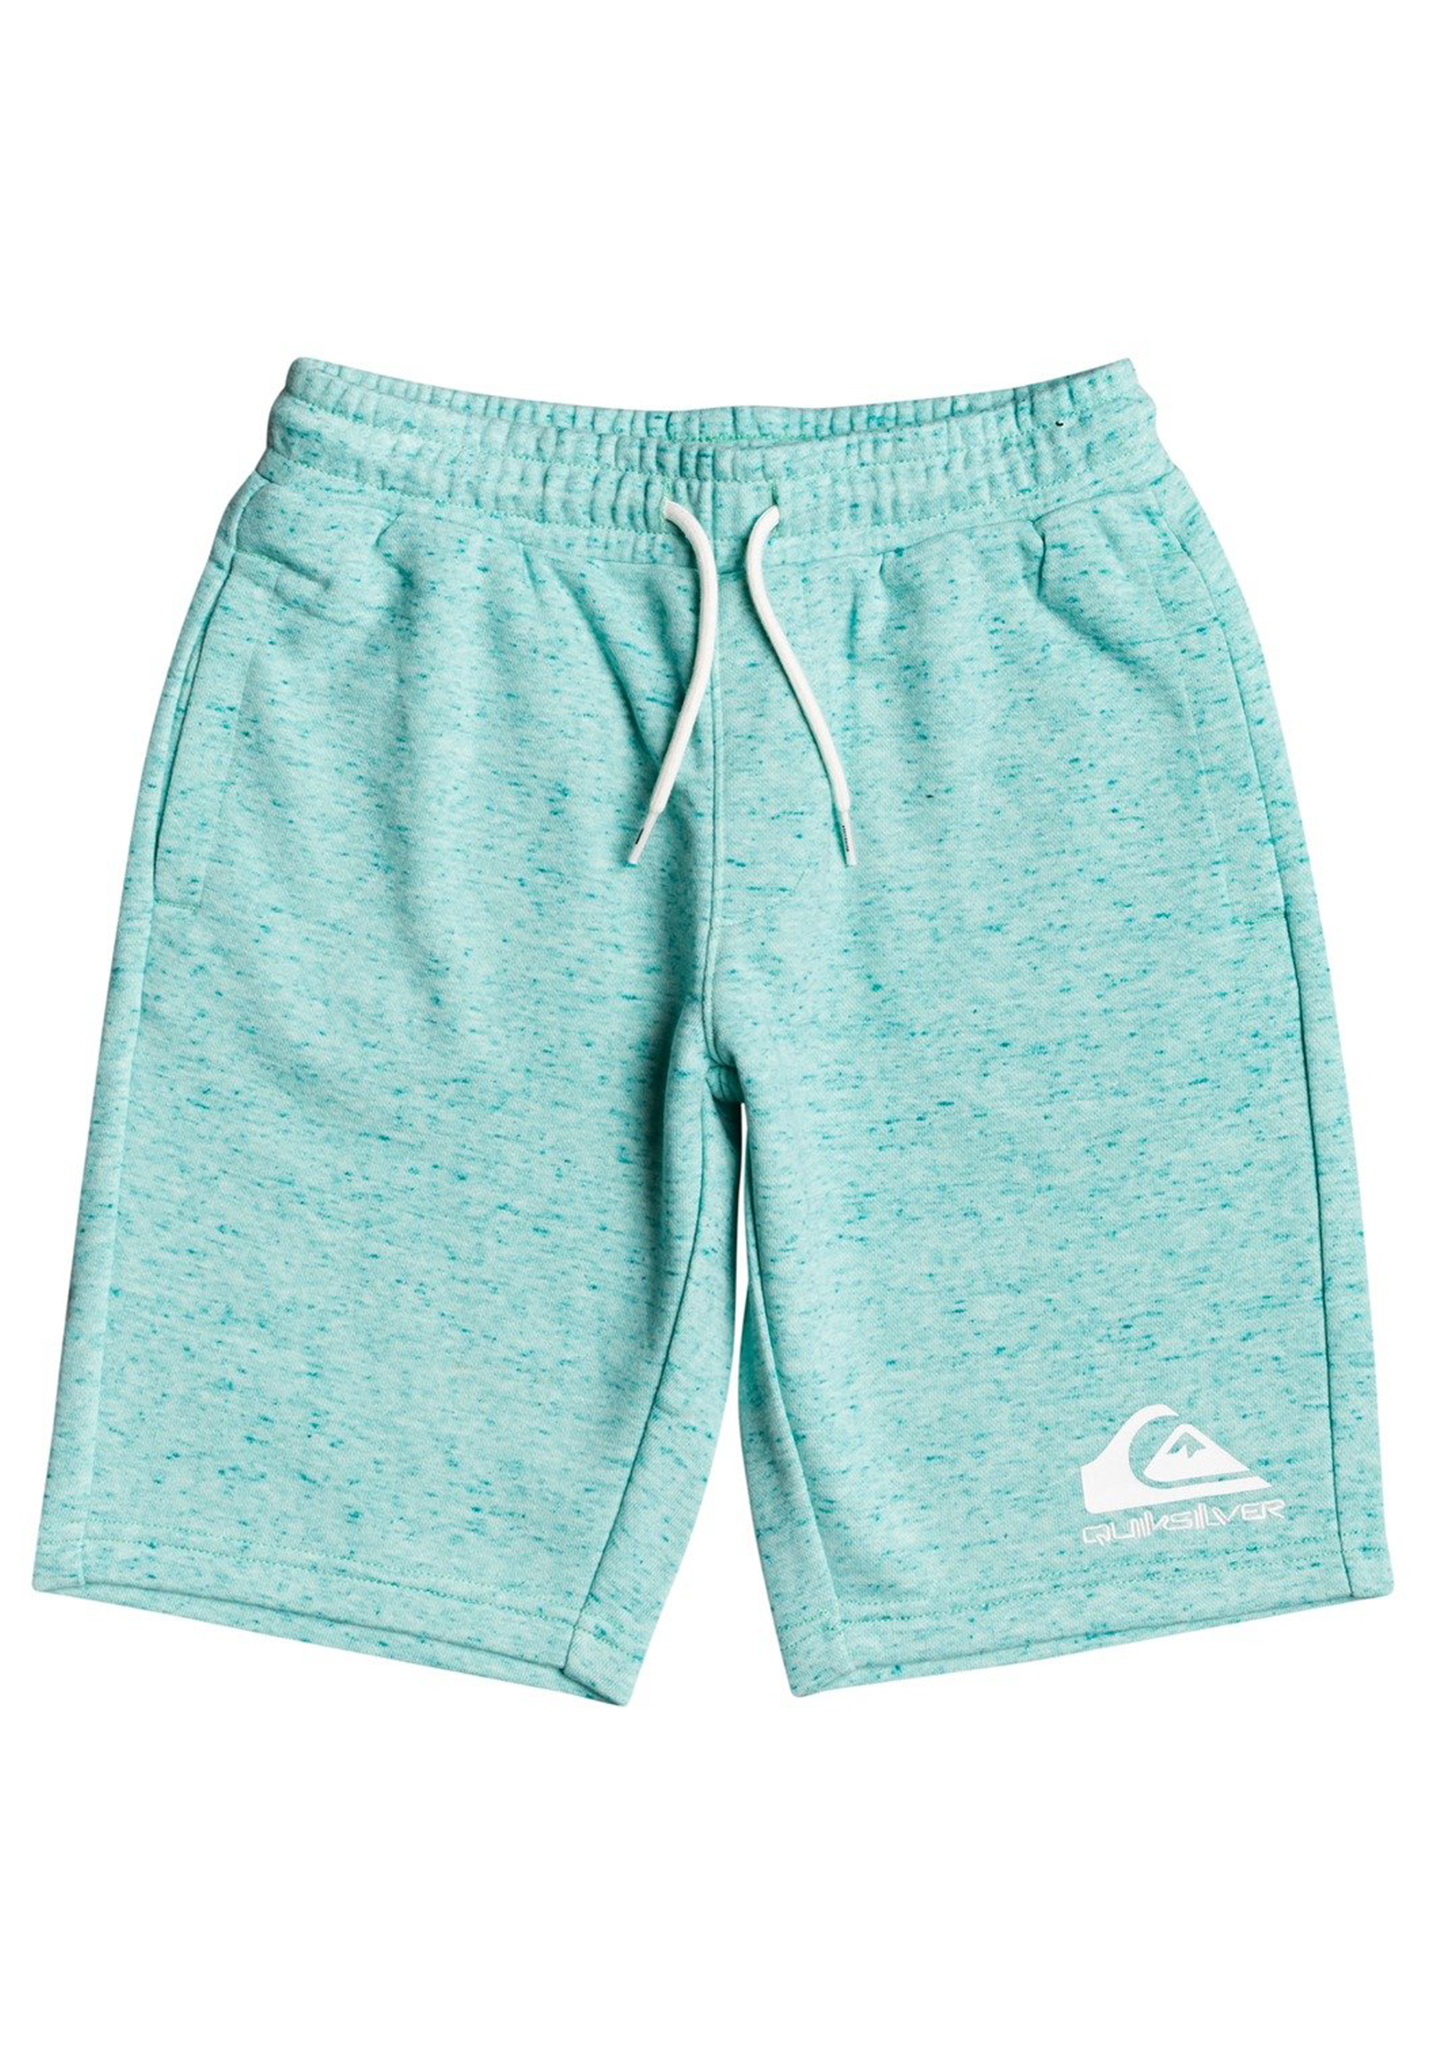 Quiksilver Easy Day Shorts krautheide S